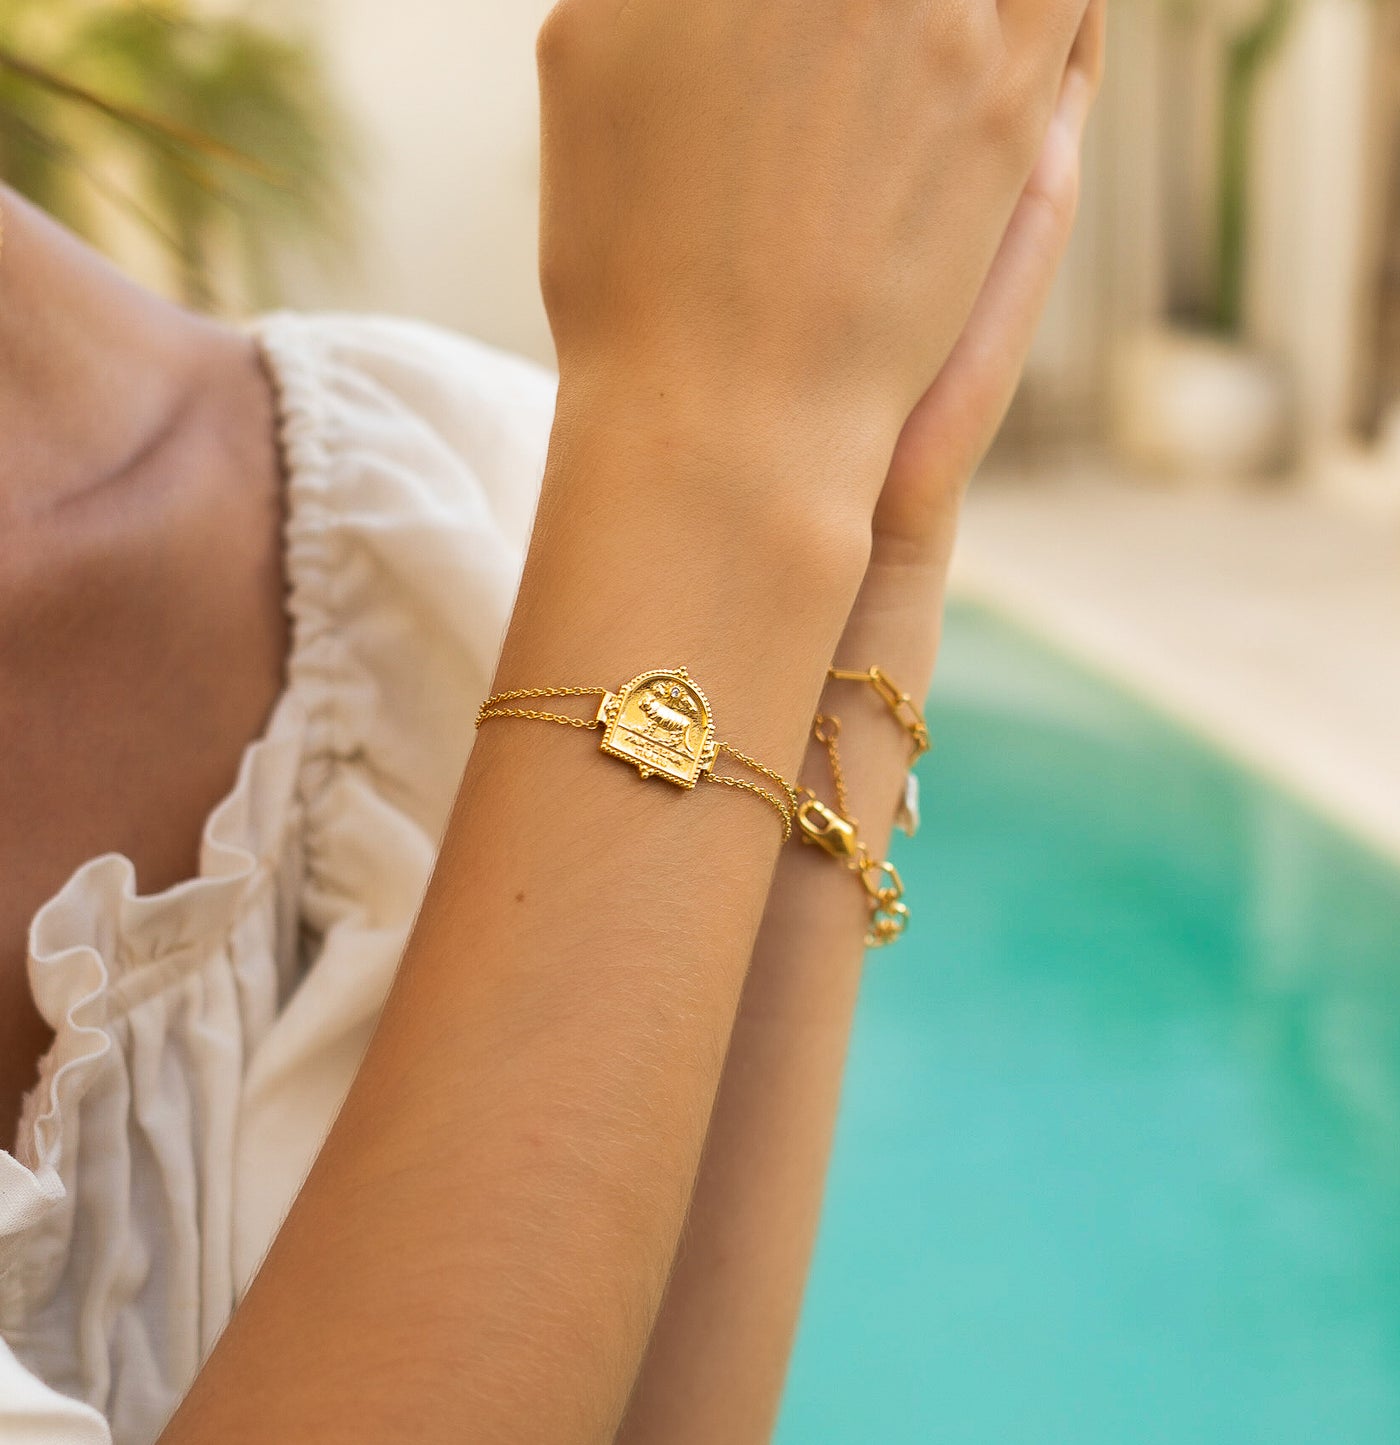 Model wearing gold plated sterling silver double chain bracelet featuring engraved tiger charm